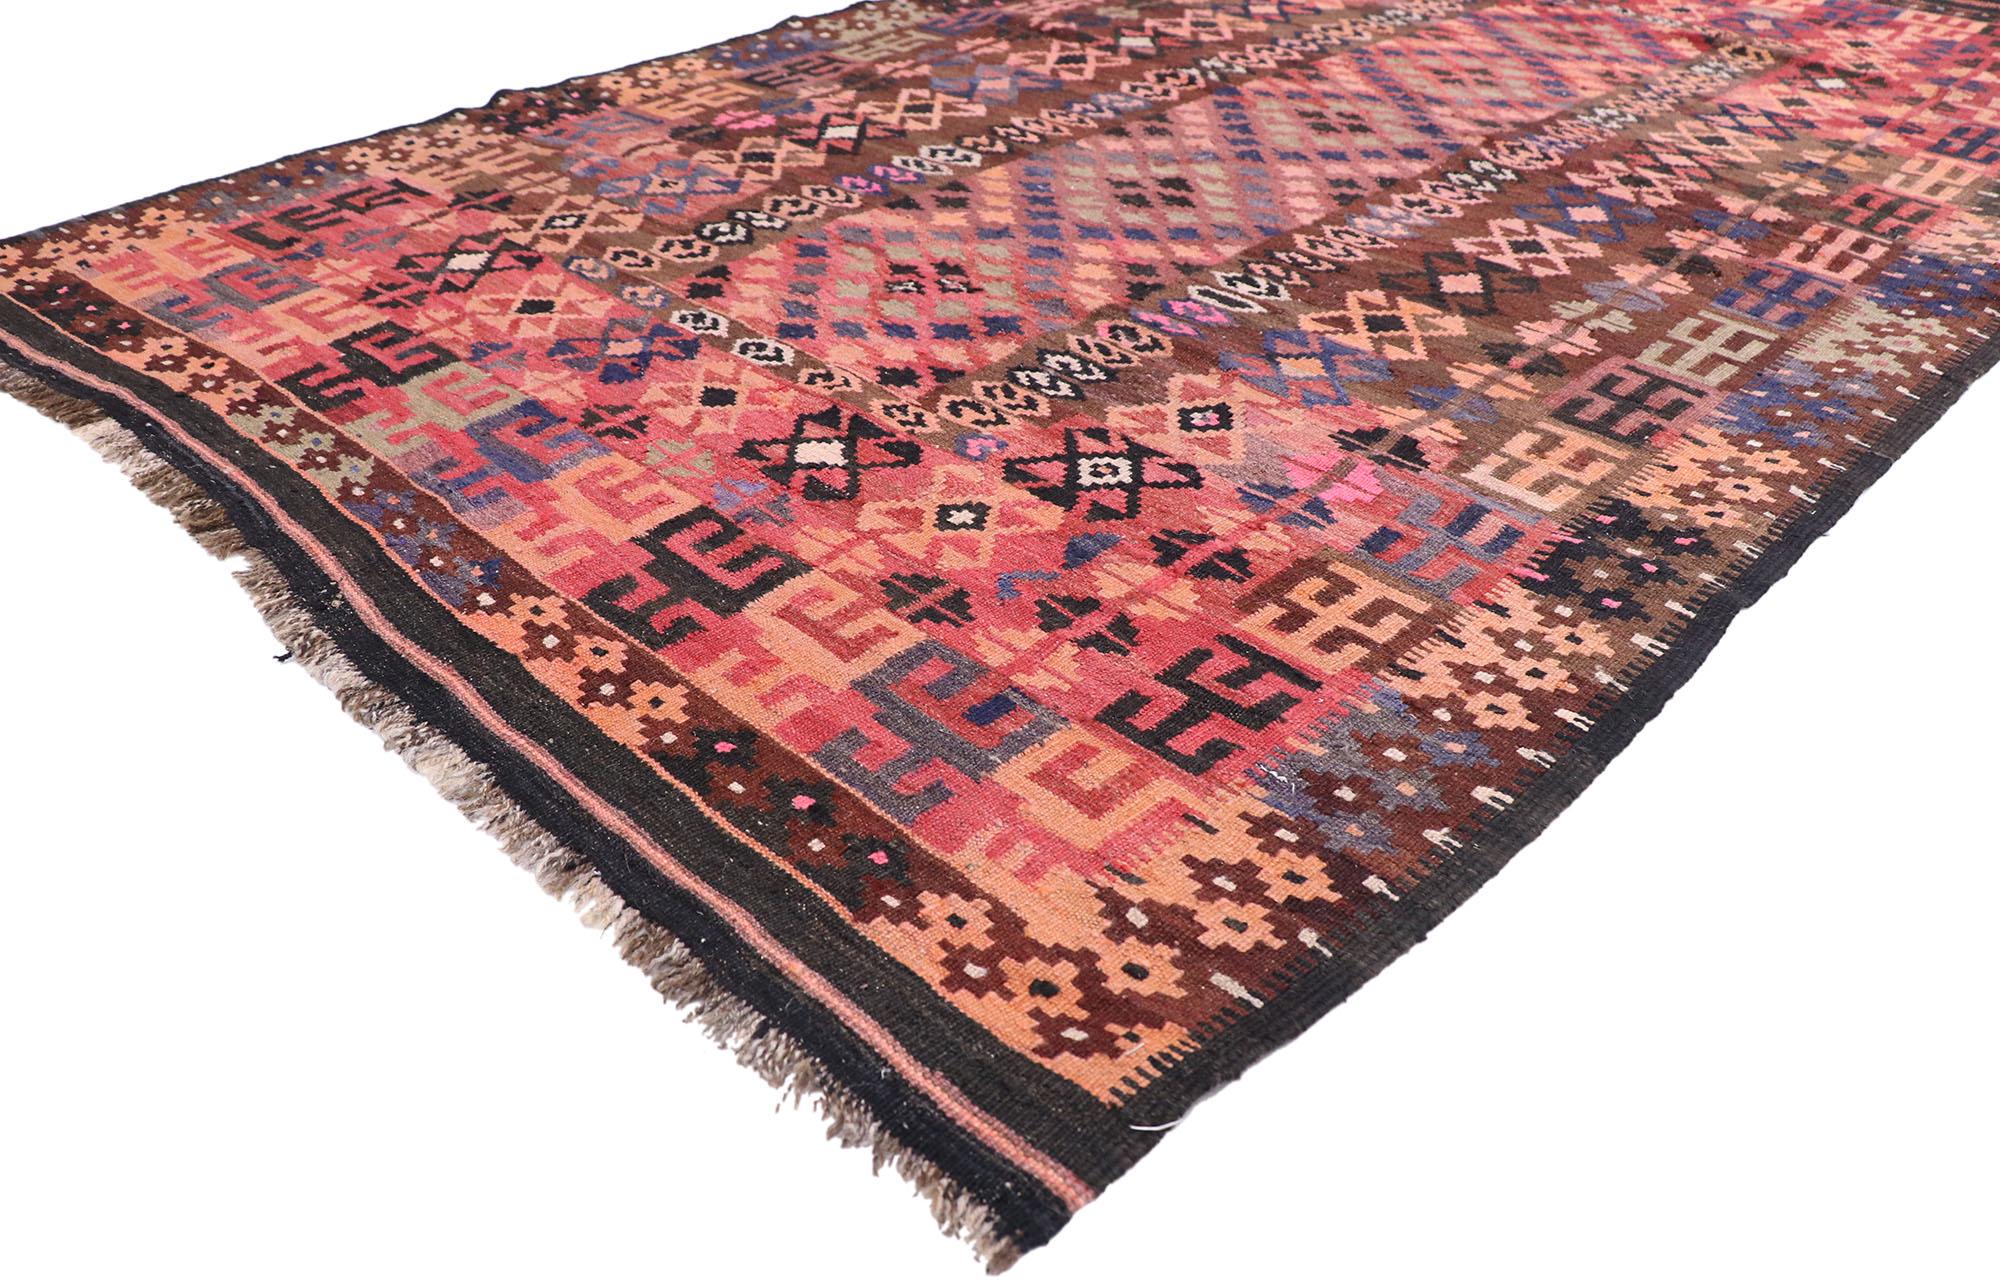 77928 Vintage Afghan Maimana Kilim Rug, 05'04 x 08'11. Embark on a journey through bohemian charm, where the fusion of Modern Desert aesthetics and contemporary Santa Fe style with a Southwest influence transforms this handwoven vintage Maimana